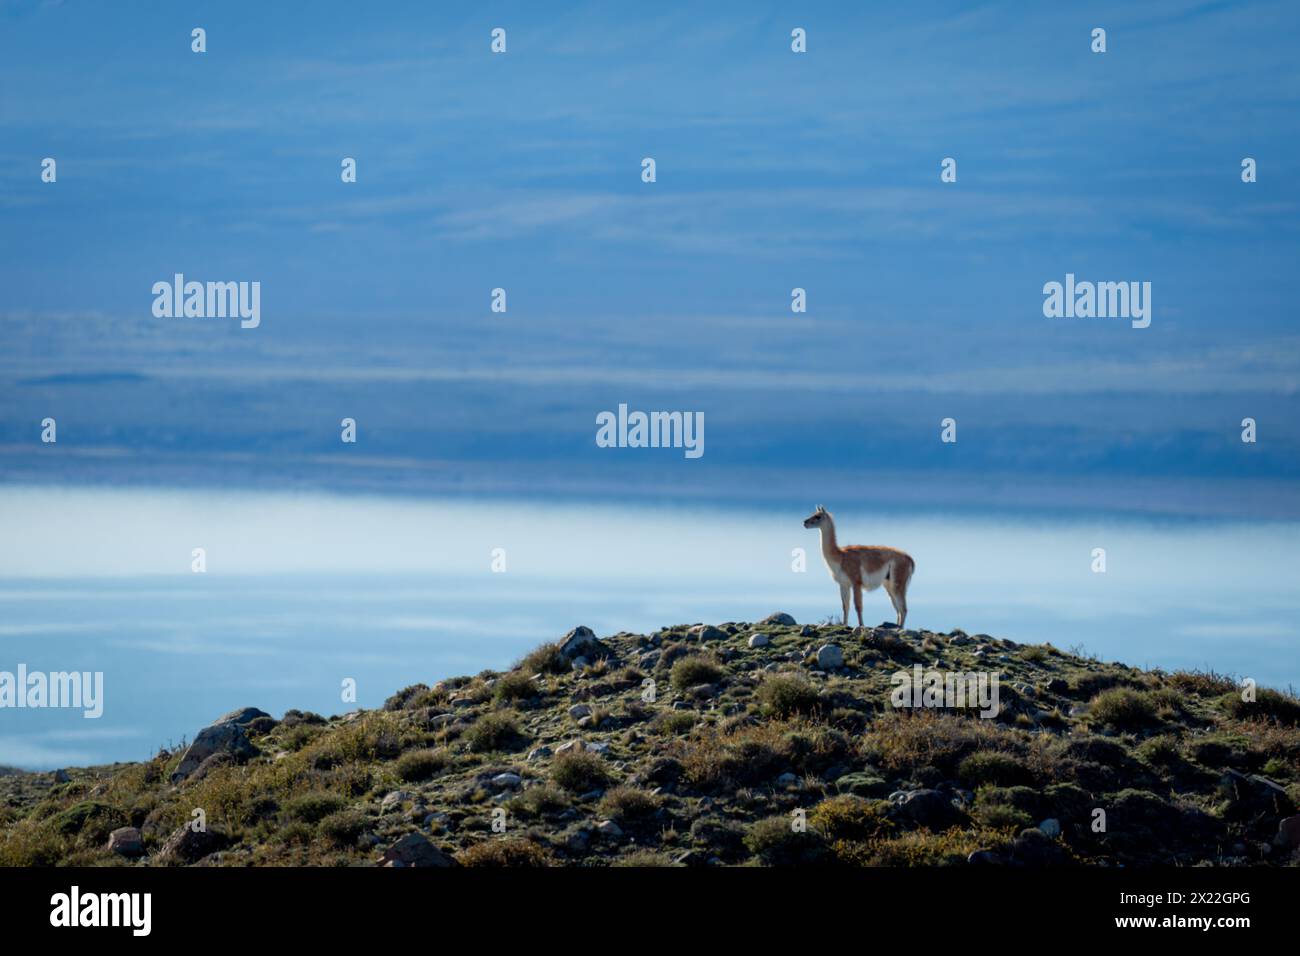 Guanaco stands in profile on grassy mound Stock Photo